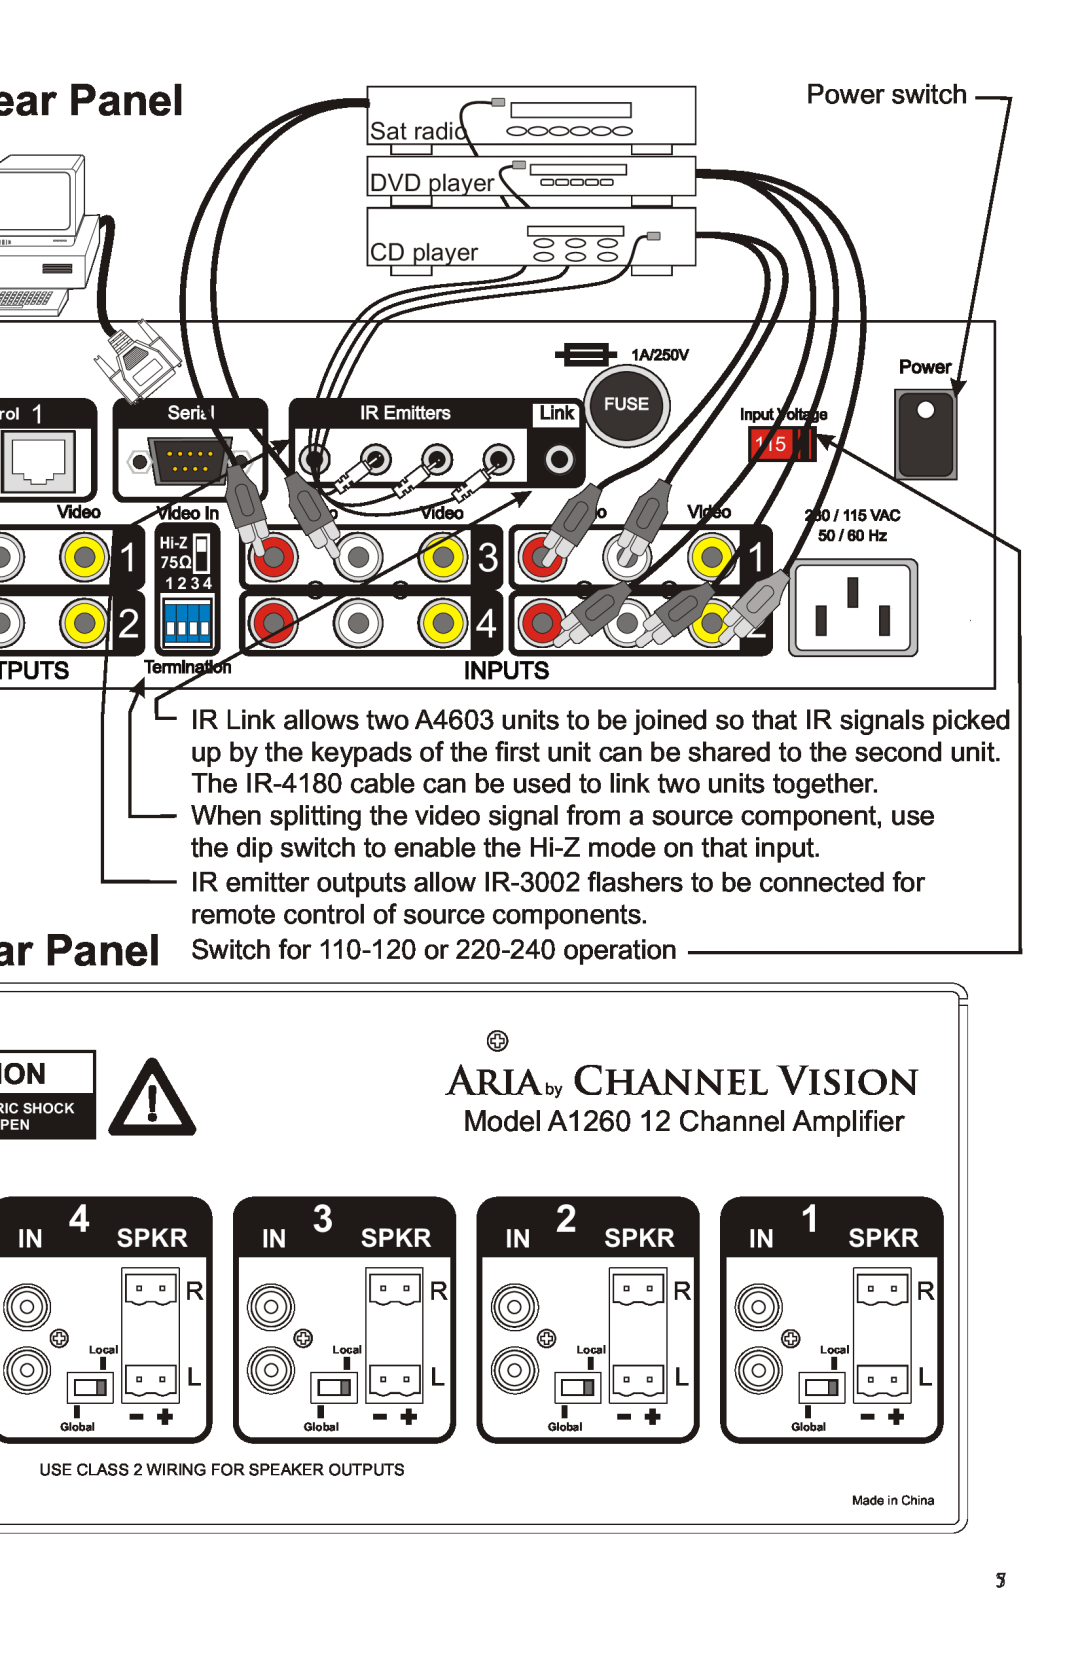 Channel Vision A4603, A4630R manual ear Panel, Ariaby Channel Vision, Model A1260 12 Channel Amplifier 